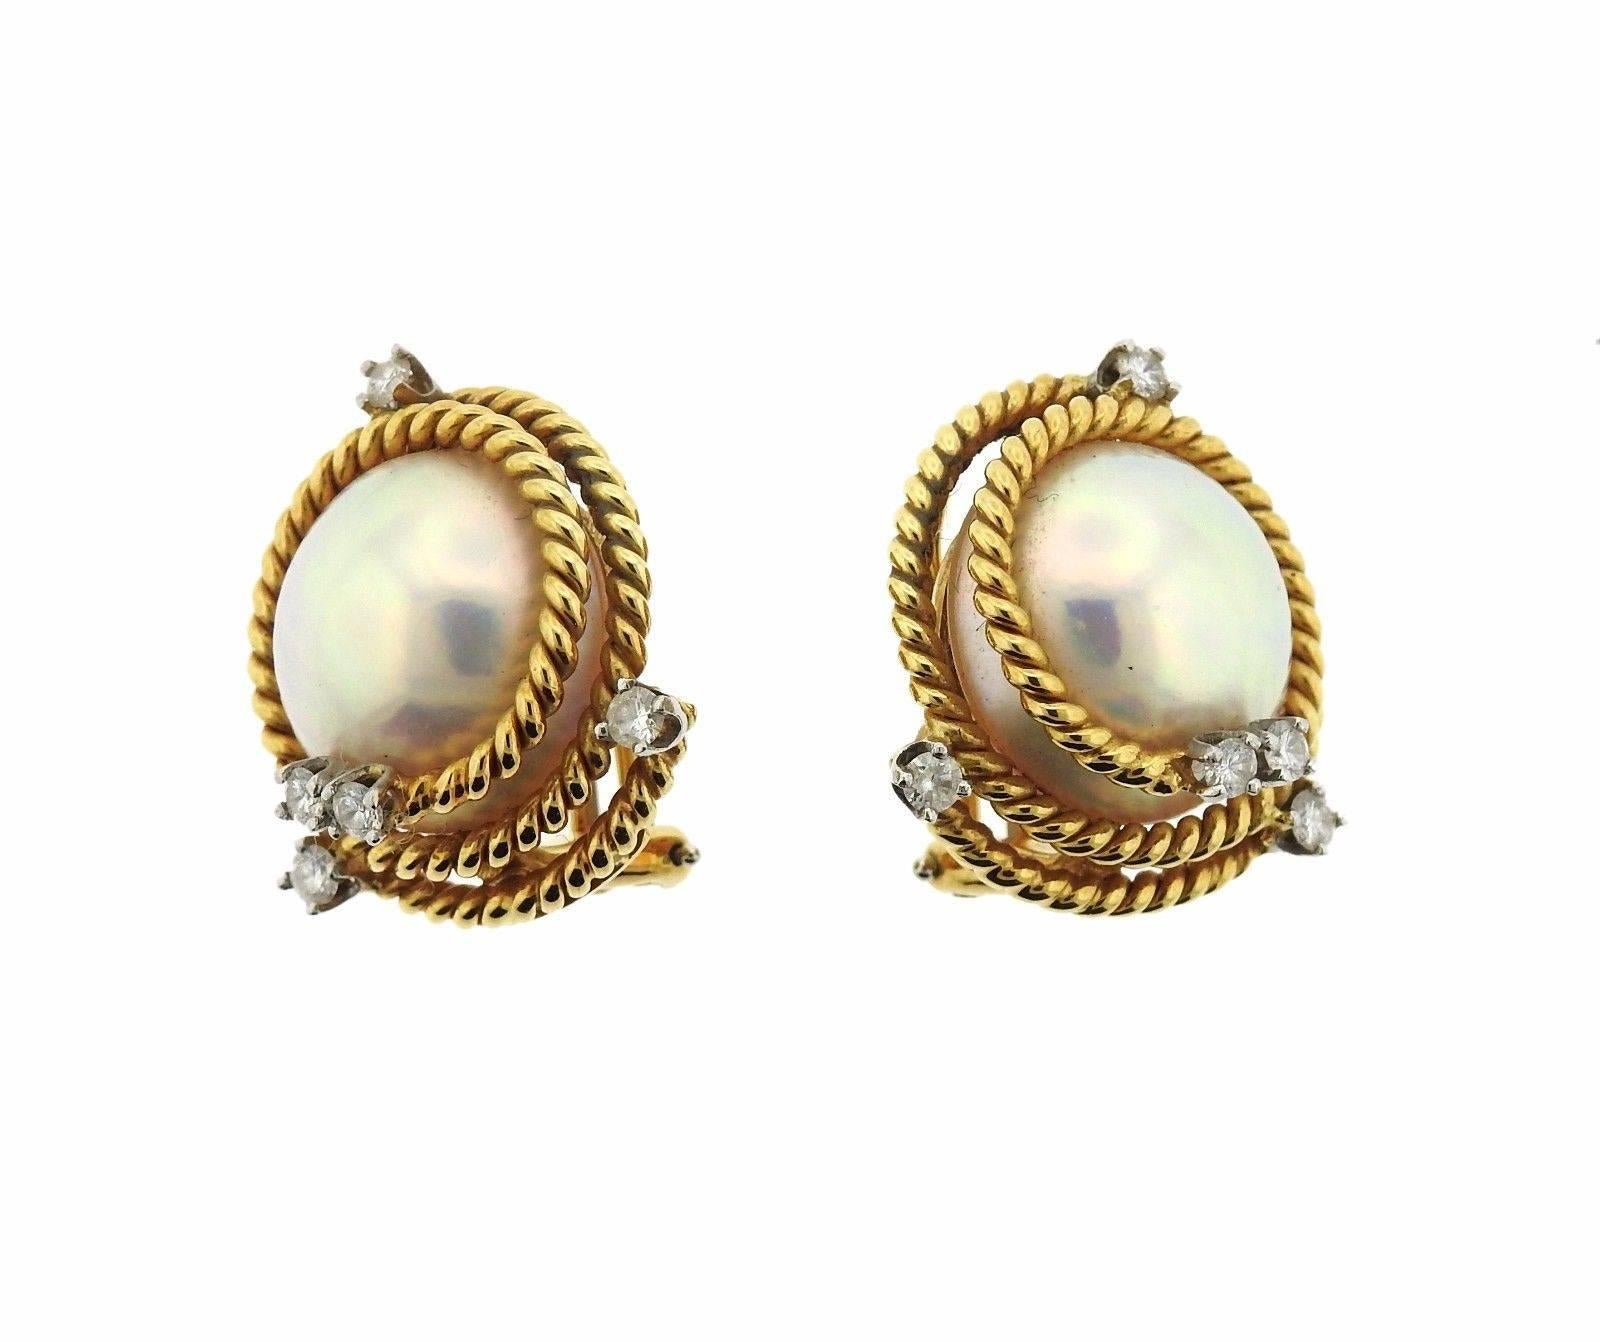 A pair of 18k gold earrings set with pearls and 0.52ctw of G/VS diamonds.  The earrings measure 21mm x 22mm.  Marked: Tiffany & Co, Schlumberger, 750.  The weight of the pair is 21.5 grams.  Current retail is $7600.